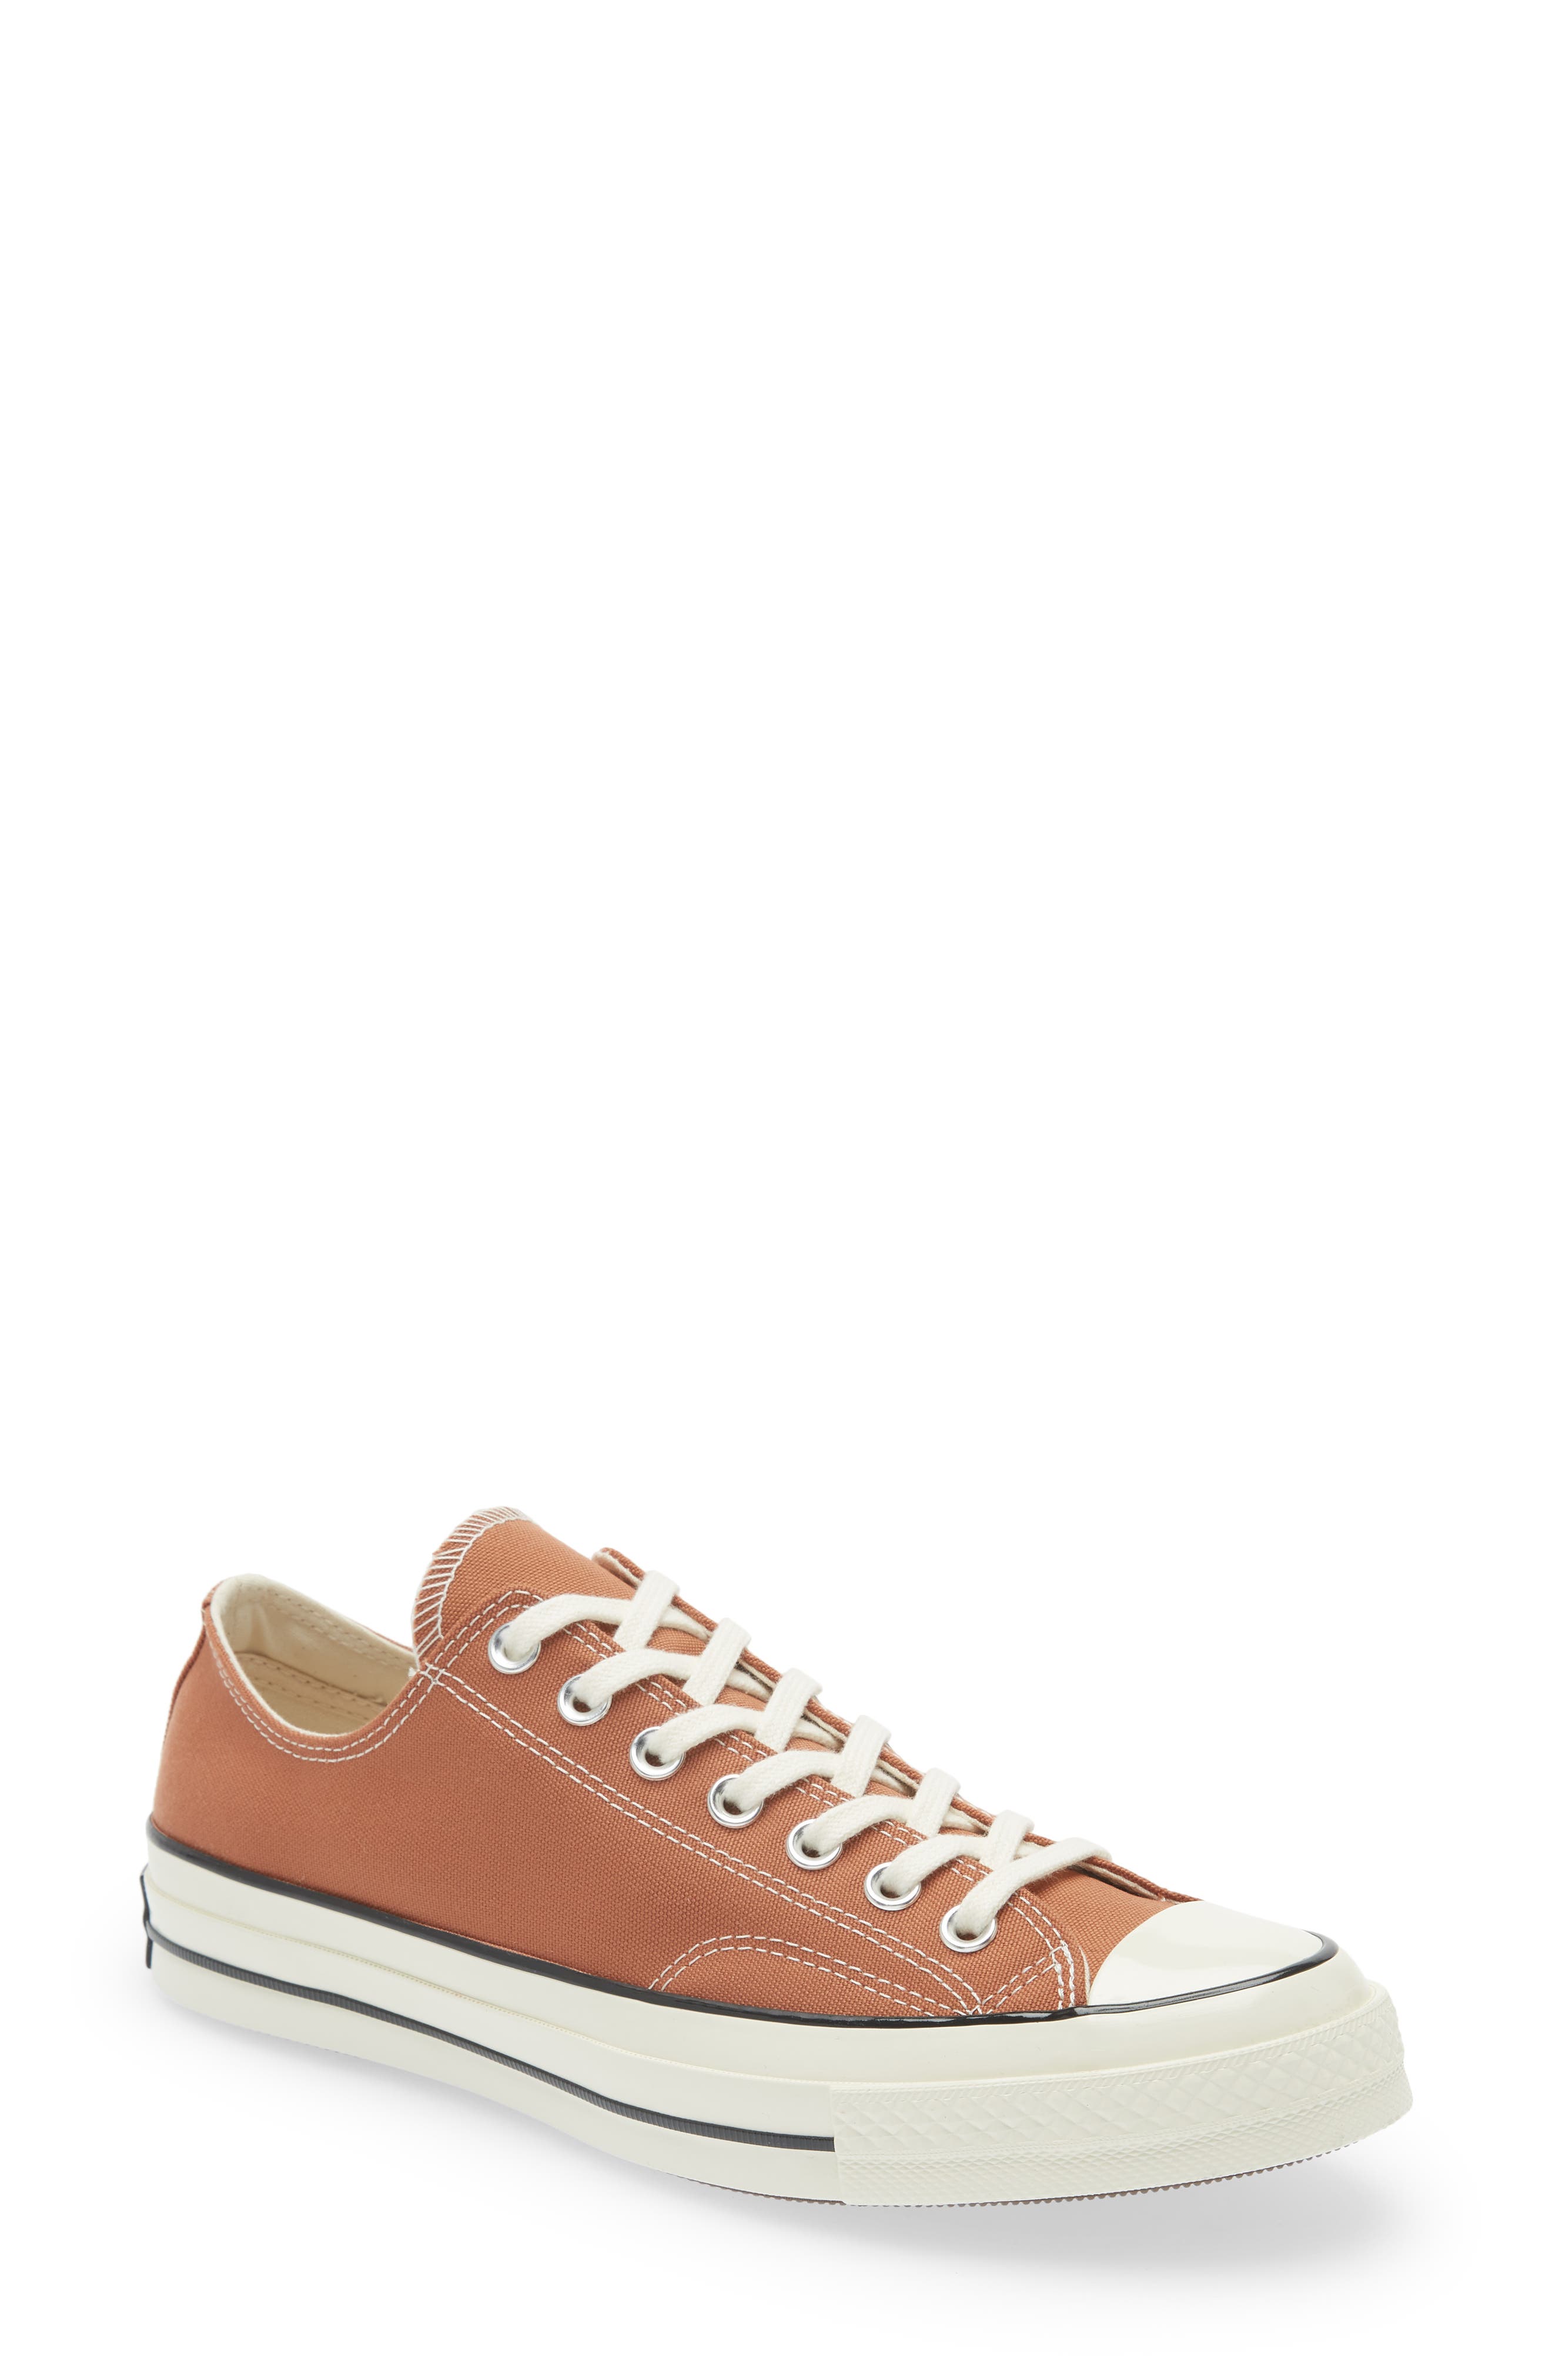 Converse Chuck 70 Ox Sneaker in Mineral Clay/Egret/Black